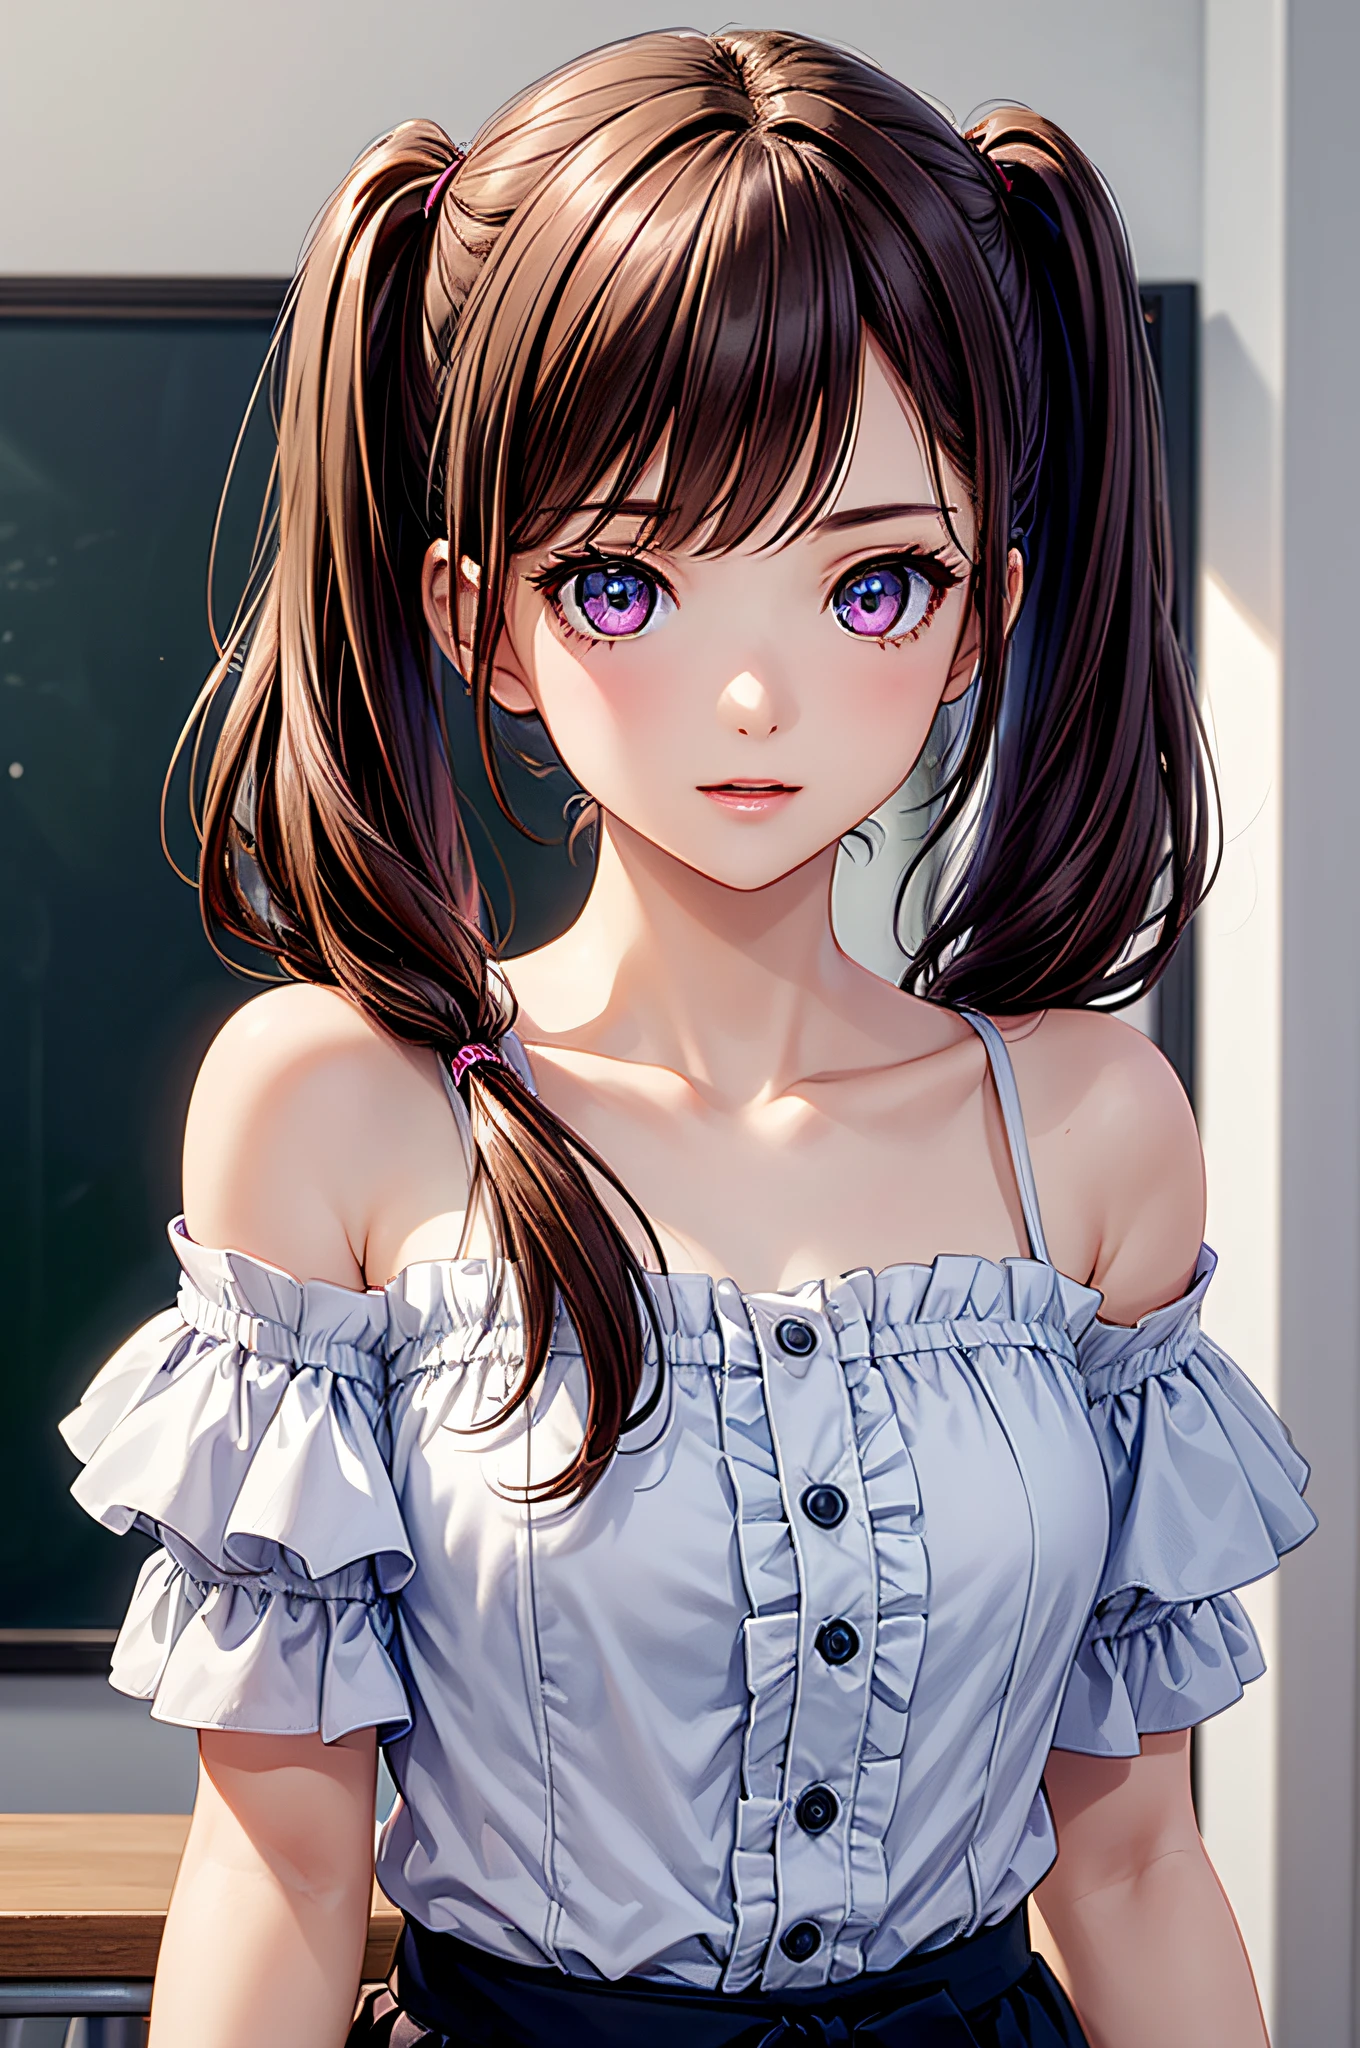 ((1girl in)), ((Best Quality)), (Ultra-detailed), (extremely detailed CG unified 8k wallpaper), Highly detailed, High-definition raw color photos, Professional Photography, (Twintails), Brown hair, Amazing face and eyes, Pink eyes, (amazingly beautiful girl), School, classroom, off shoulder,